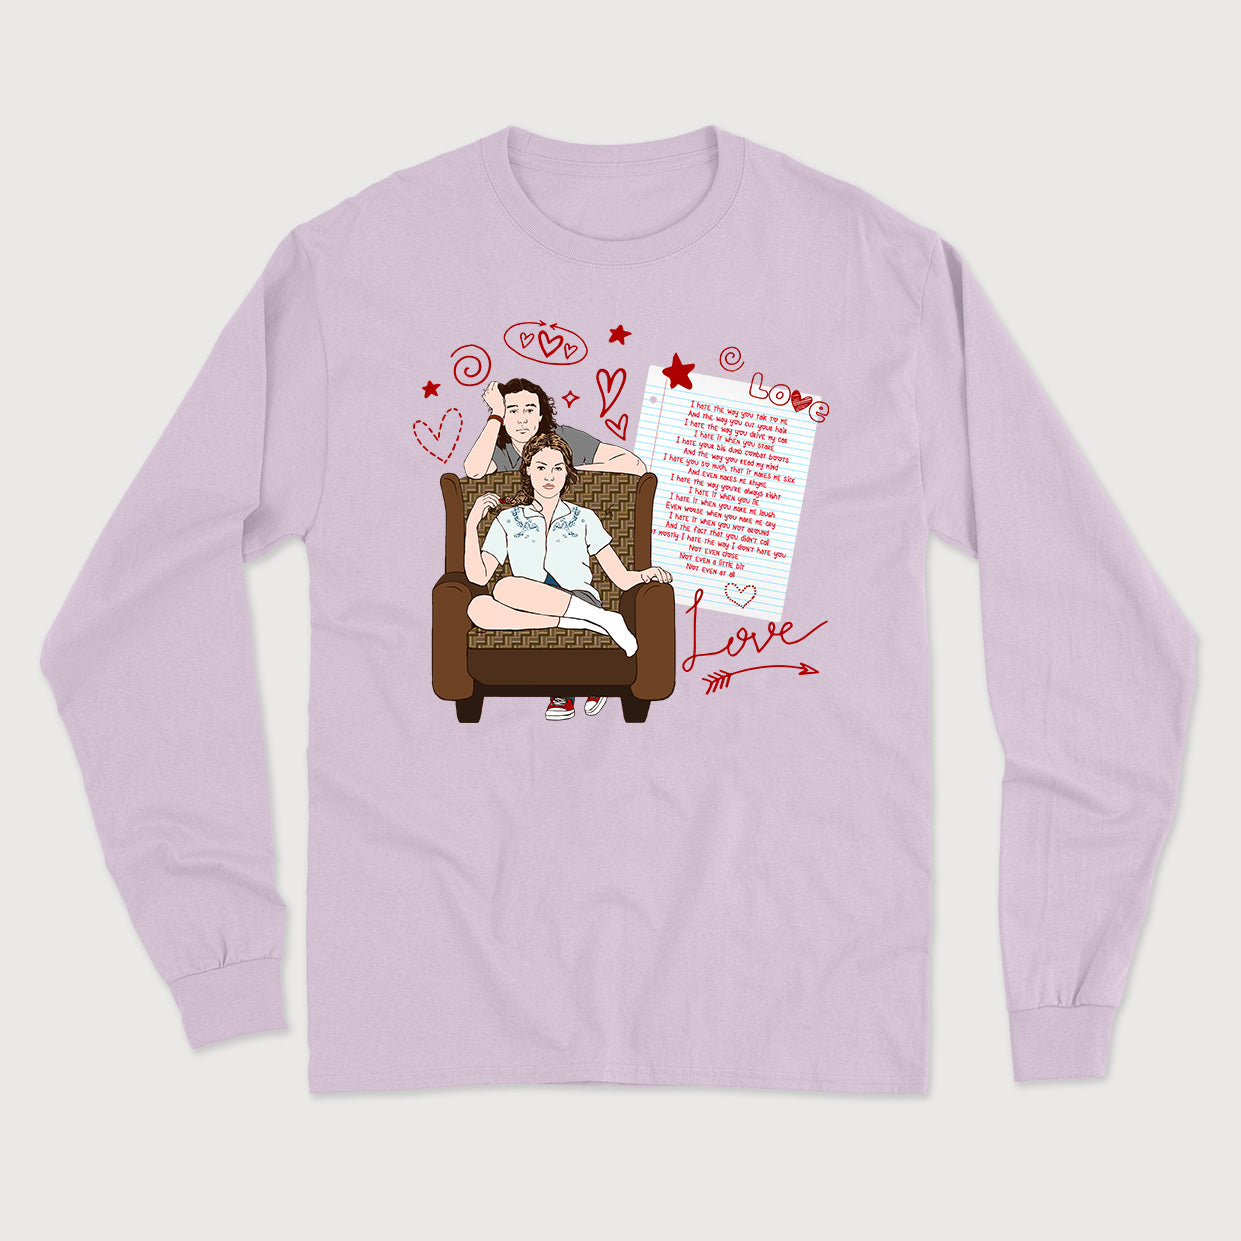 10 THINGS I HATE ABOUT YOU longsleeve vintage unisexe - tamelo boutique